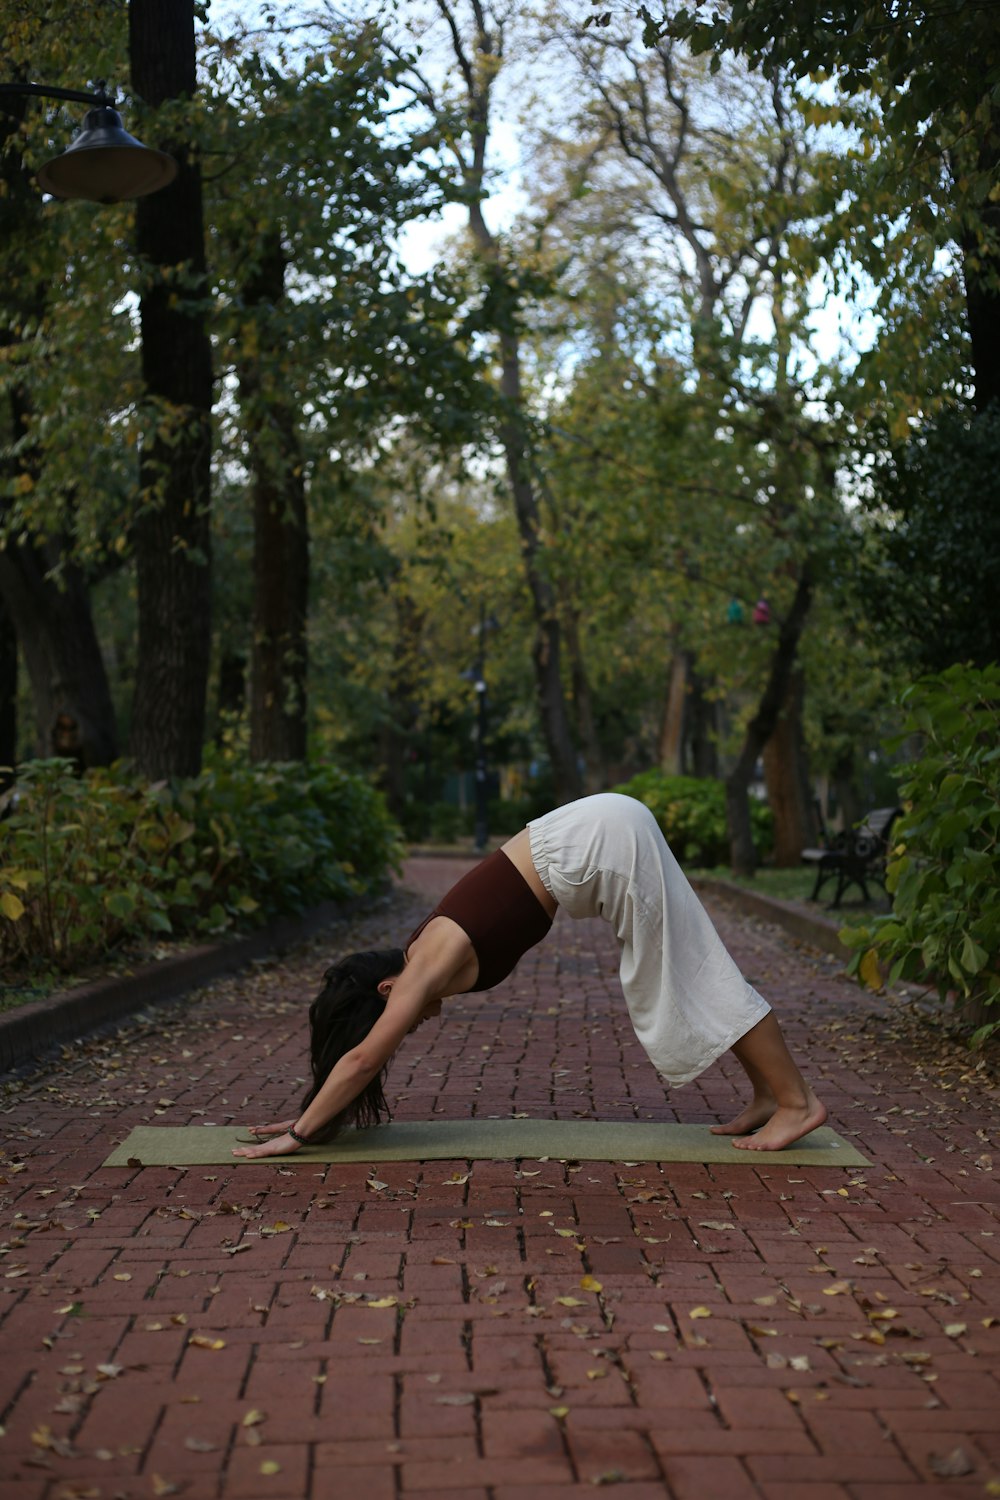 a woman is doing a yoga pose on a brick path